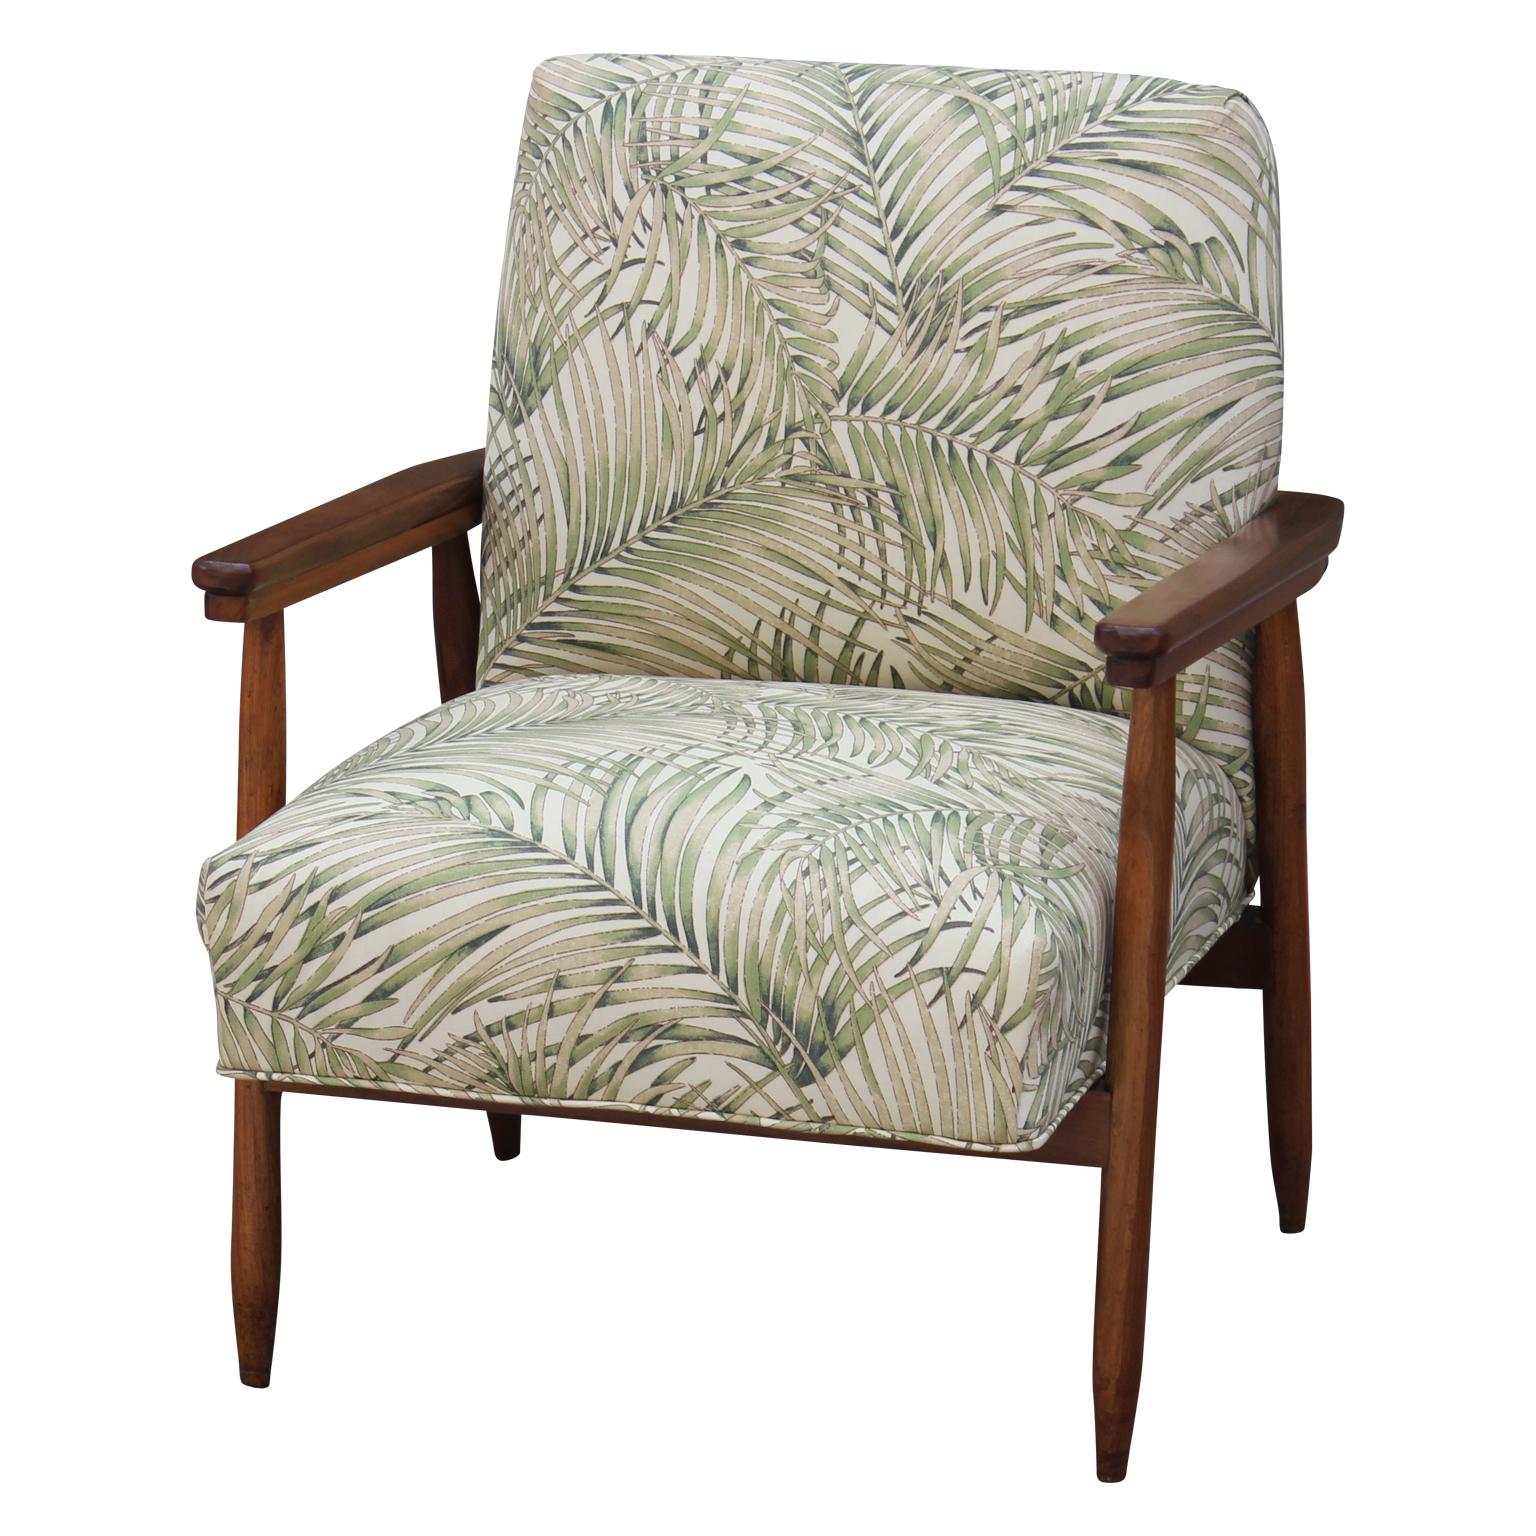 Mid-20th Century Pair of Modern Italian Danish Style Palm Leaf Patterned Lounge Chairs